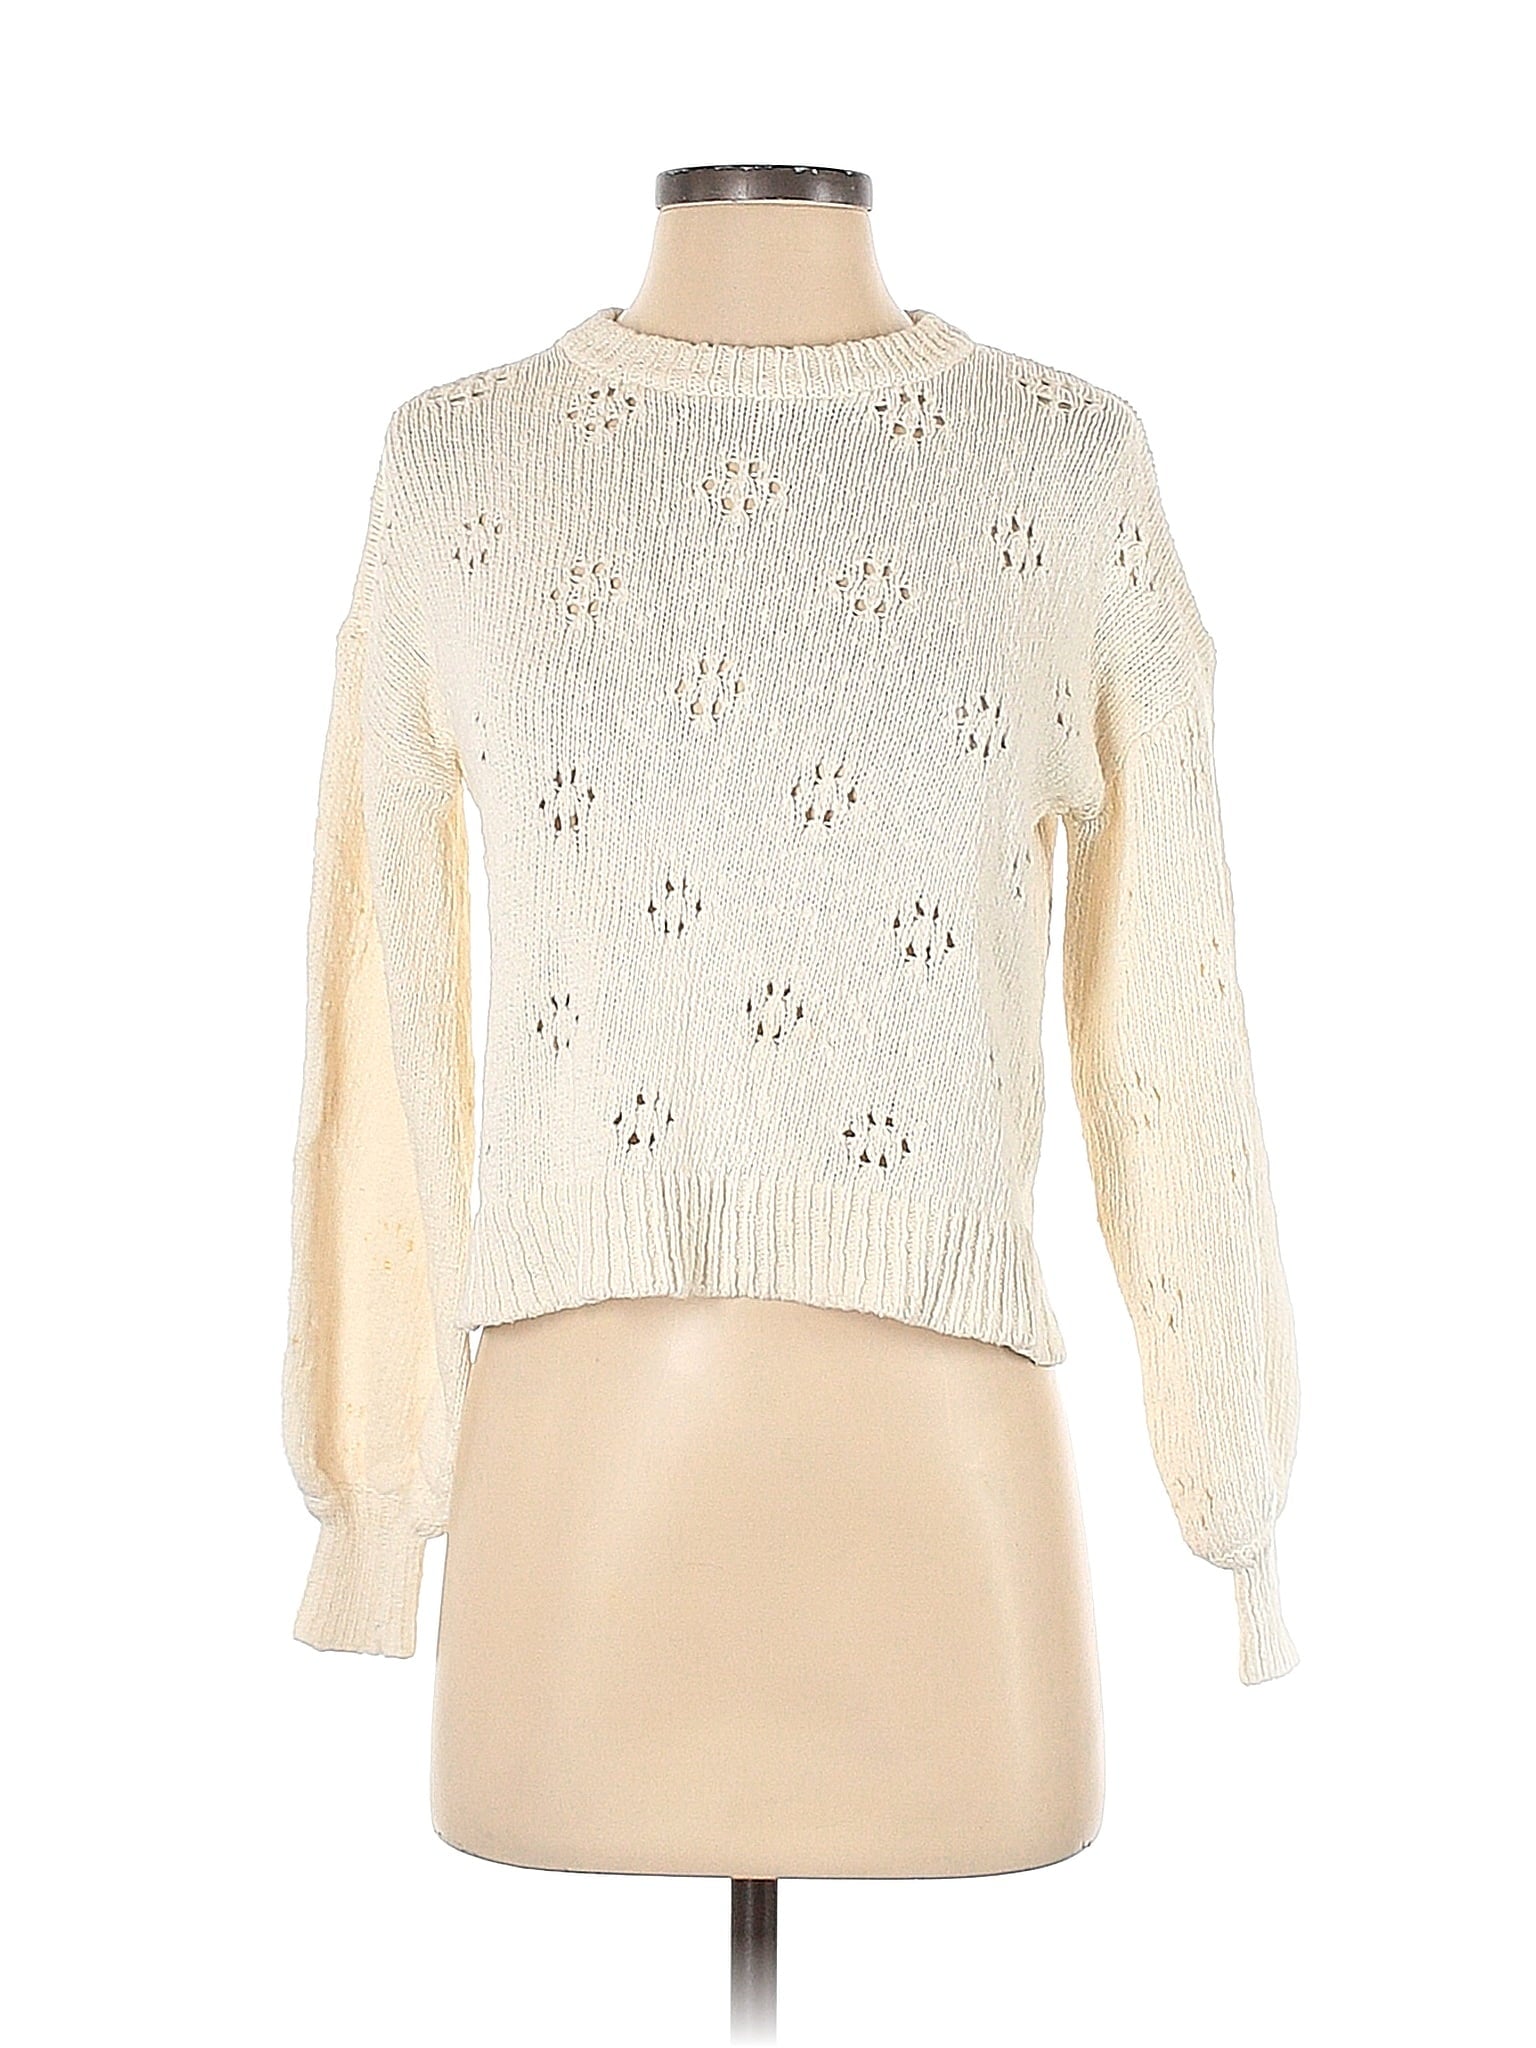 Pullover Sweater size - XXS